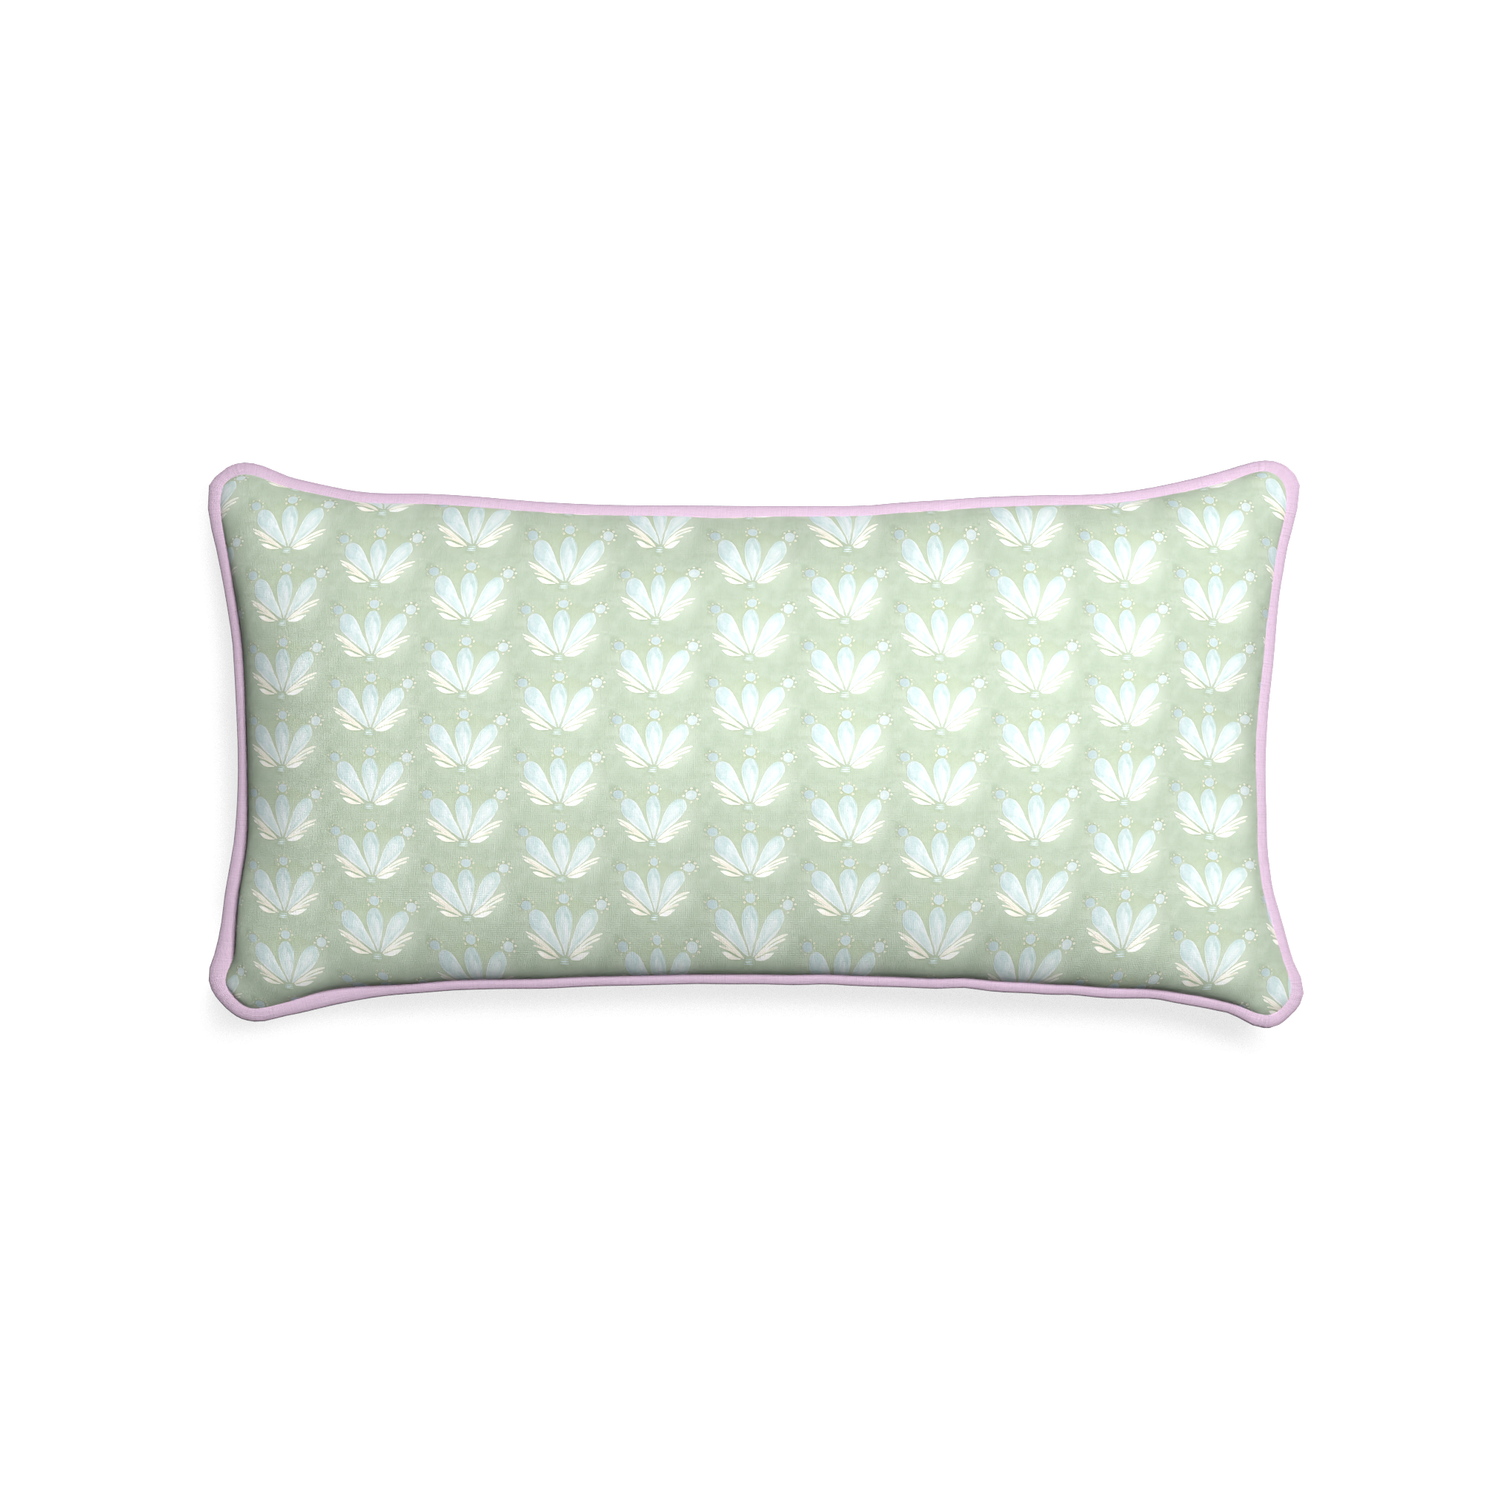 Midi-lumbar serena sea salt custom blue & green floral drop repeatpillow with l piping on white background